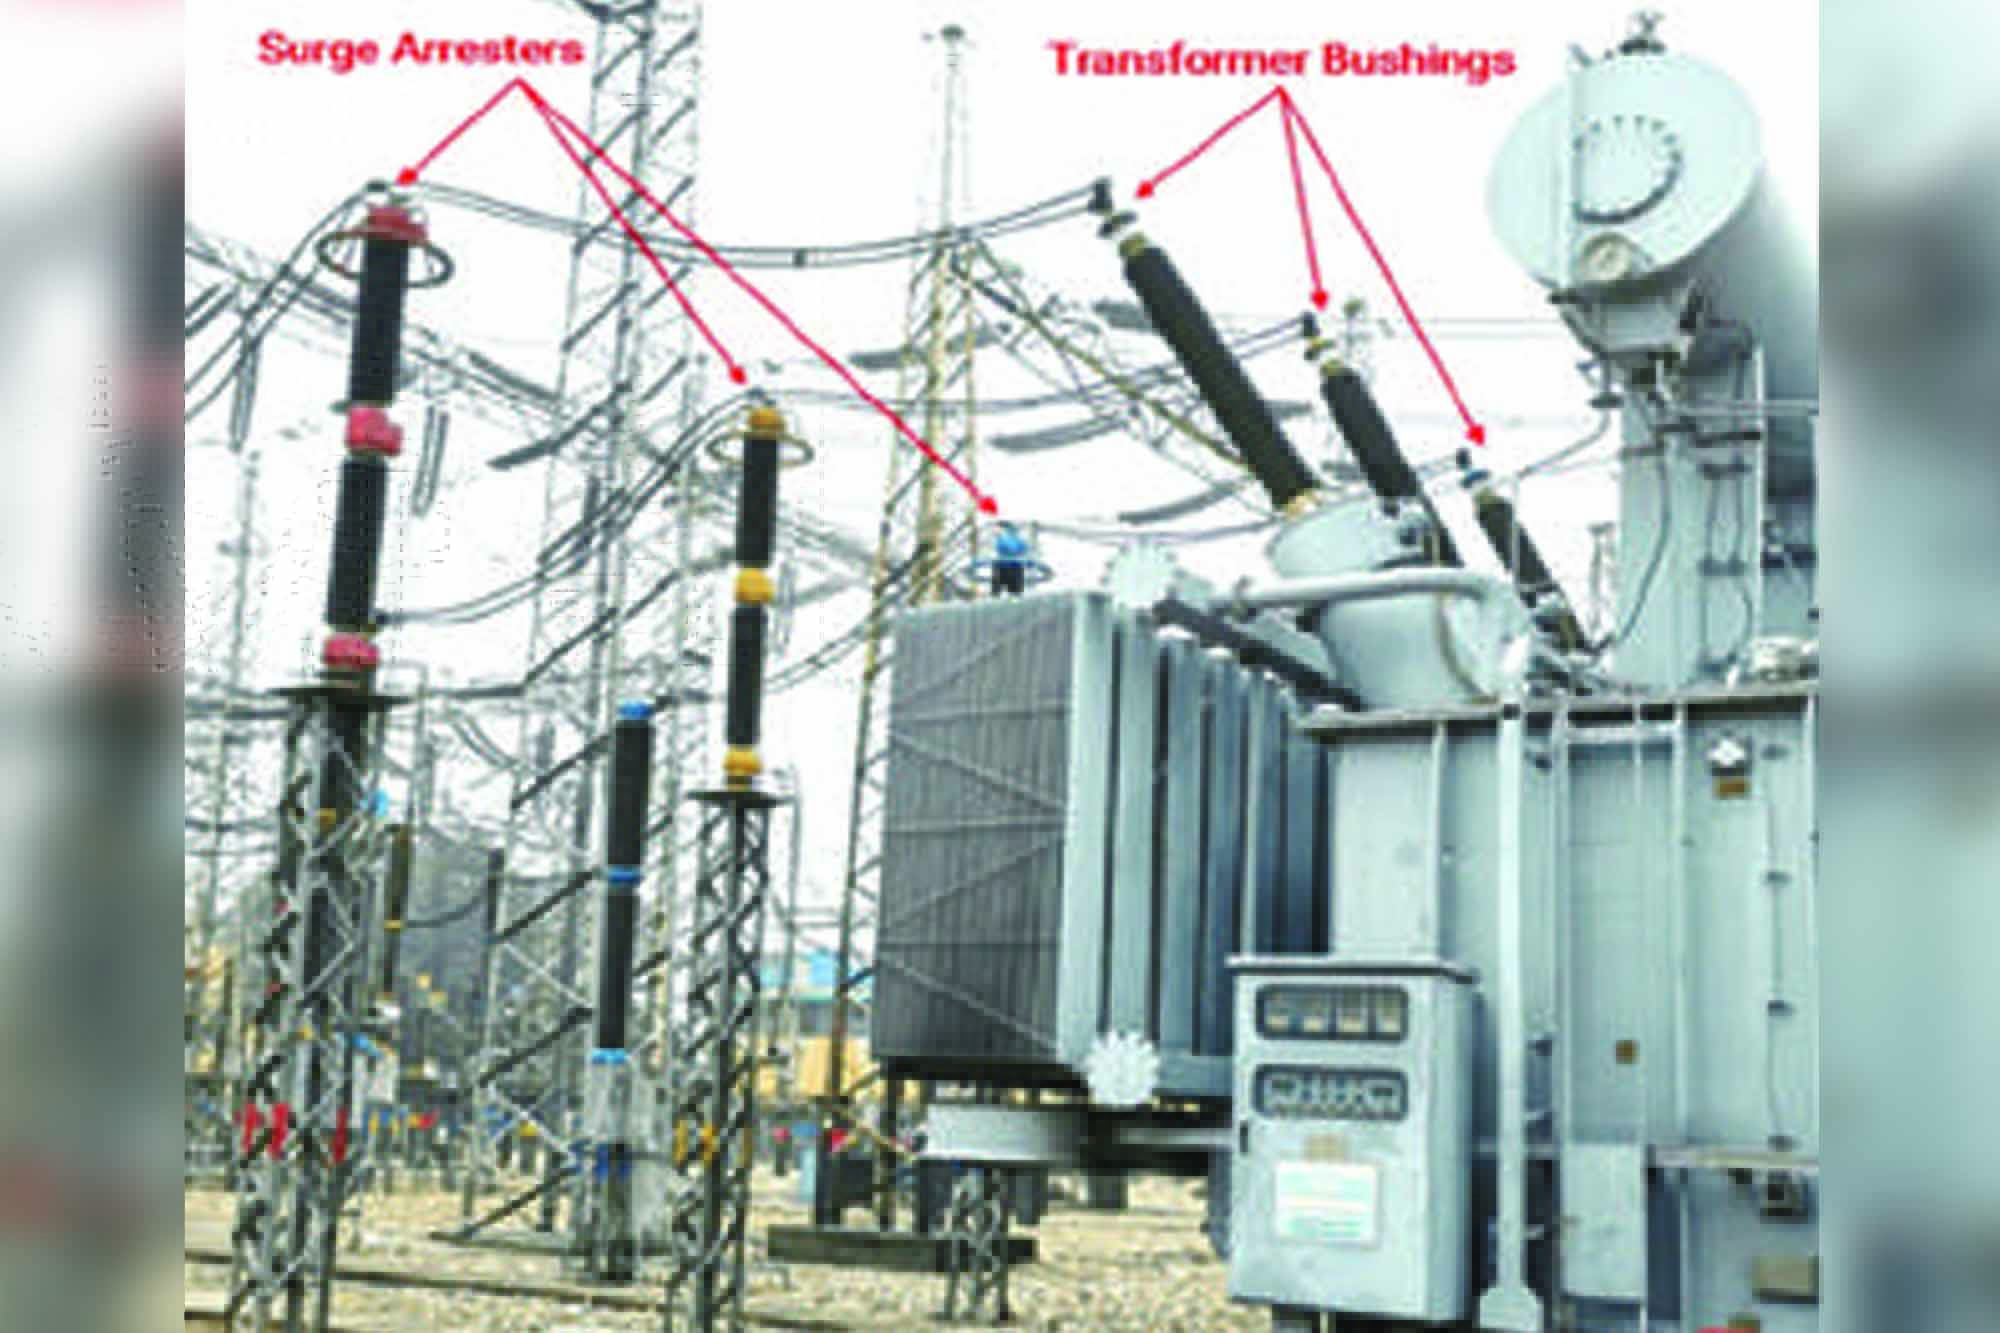 Optimising Safety, Surge arrester voltage selection tailored to system earthing configurations